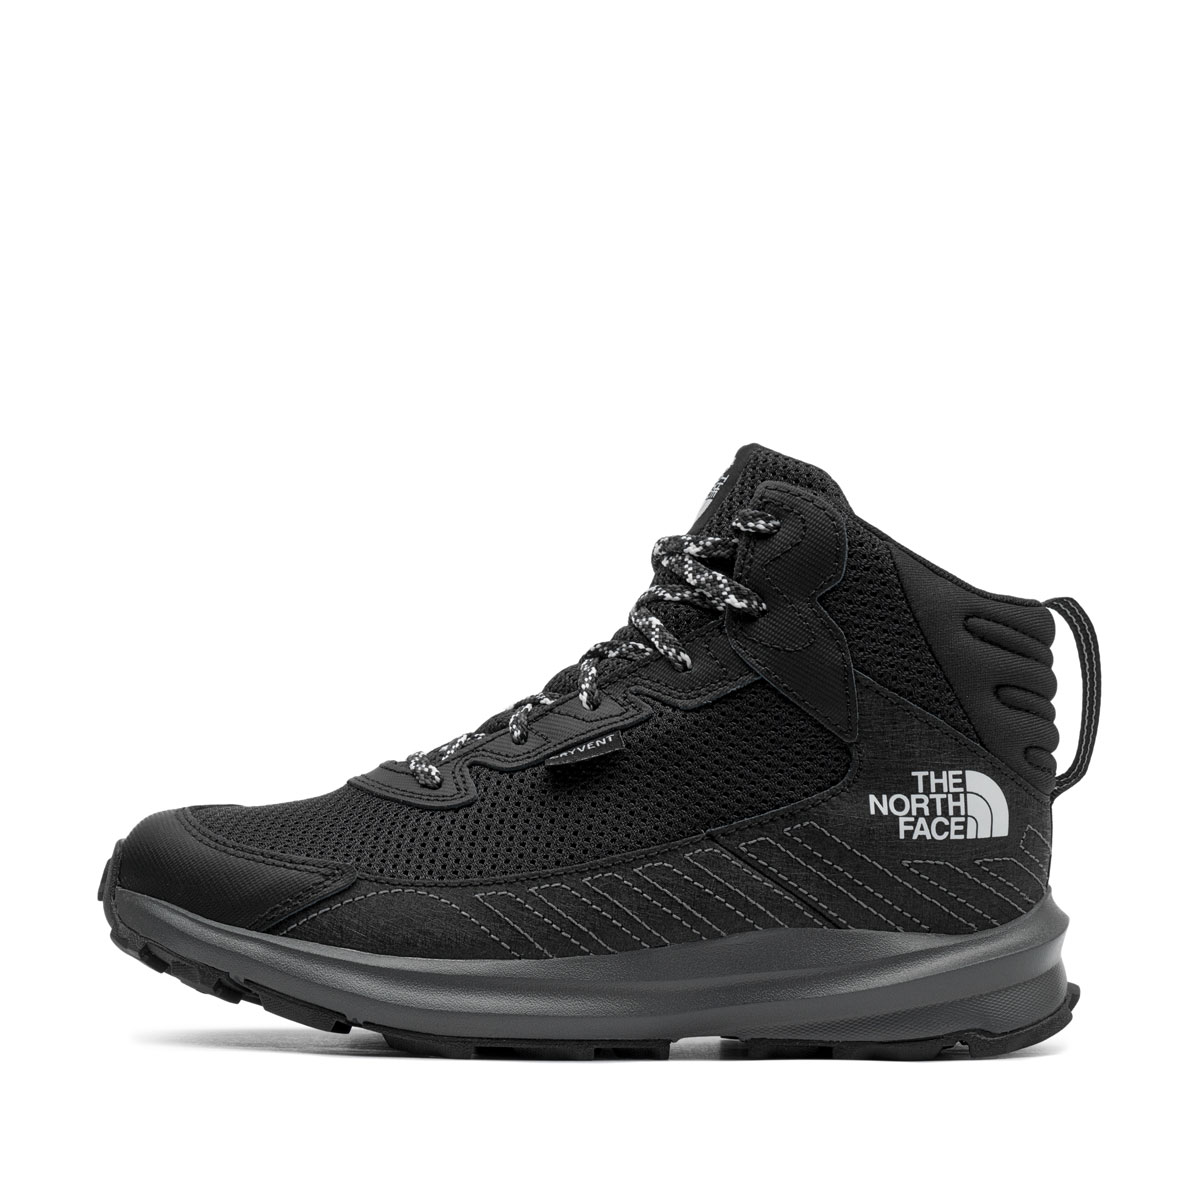 The North Face Fastpack Hiker Mid Waterproof Дамски спортни обувки NF0A7W5VKX7